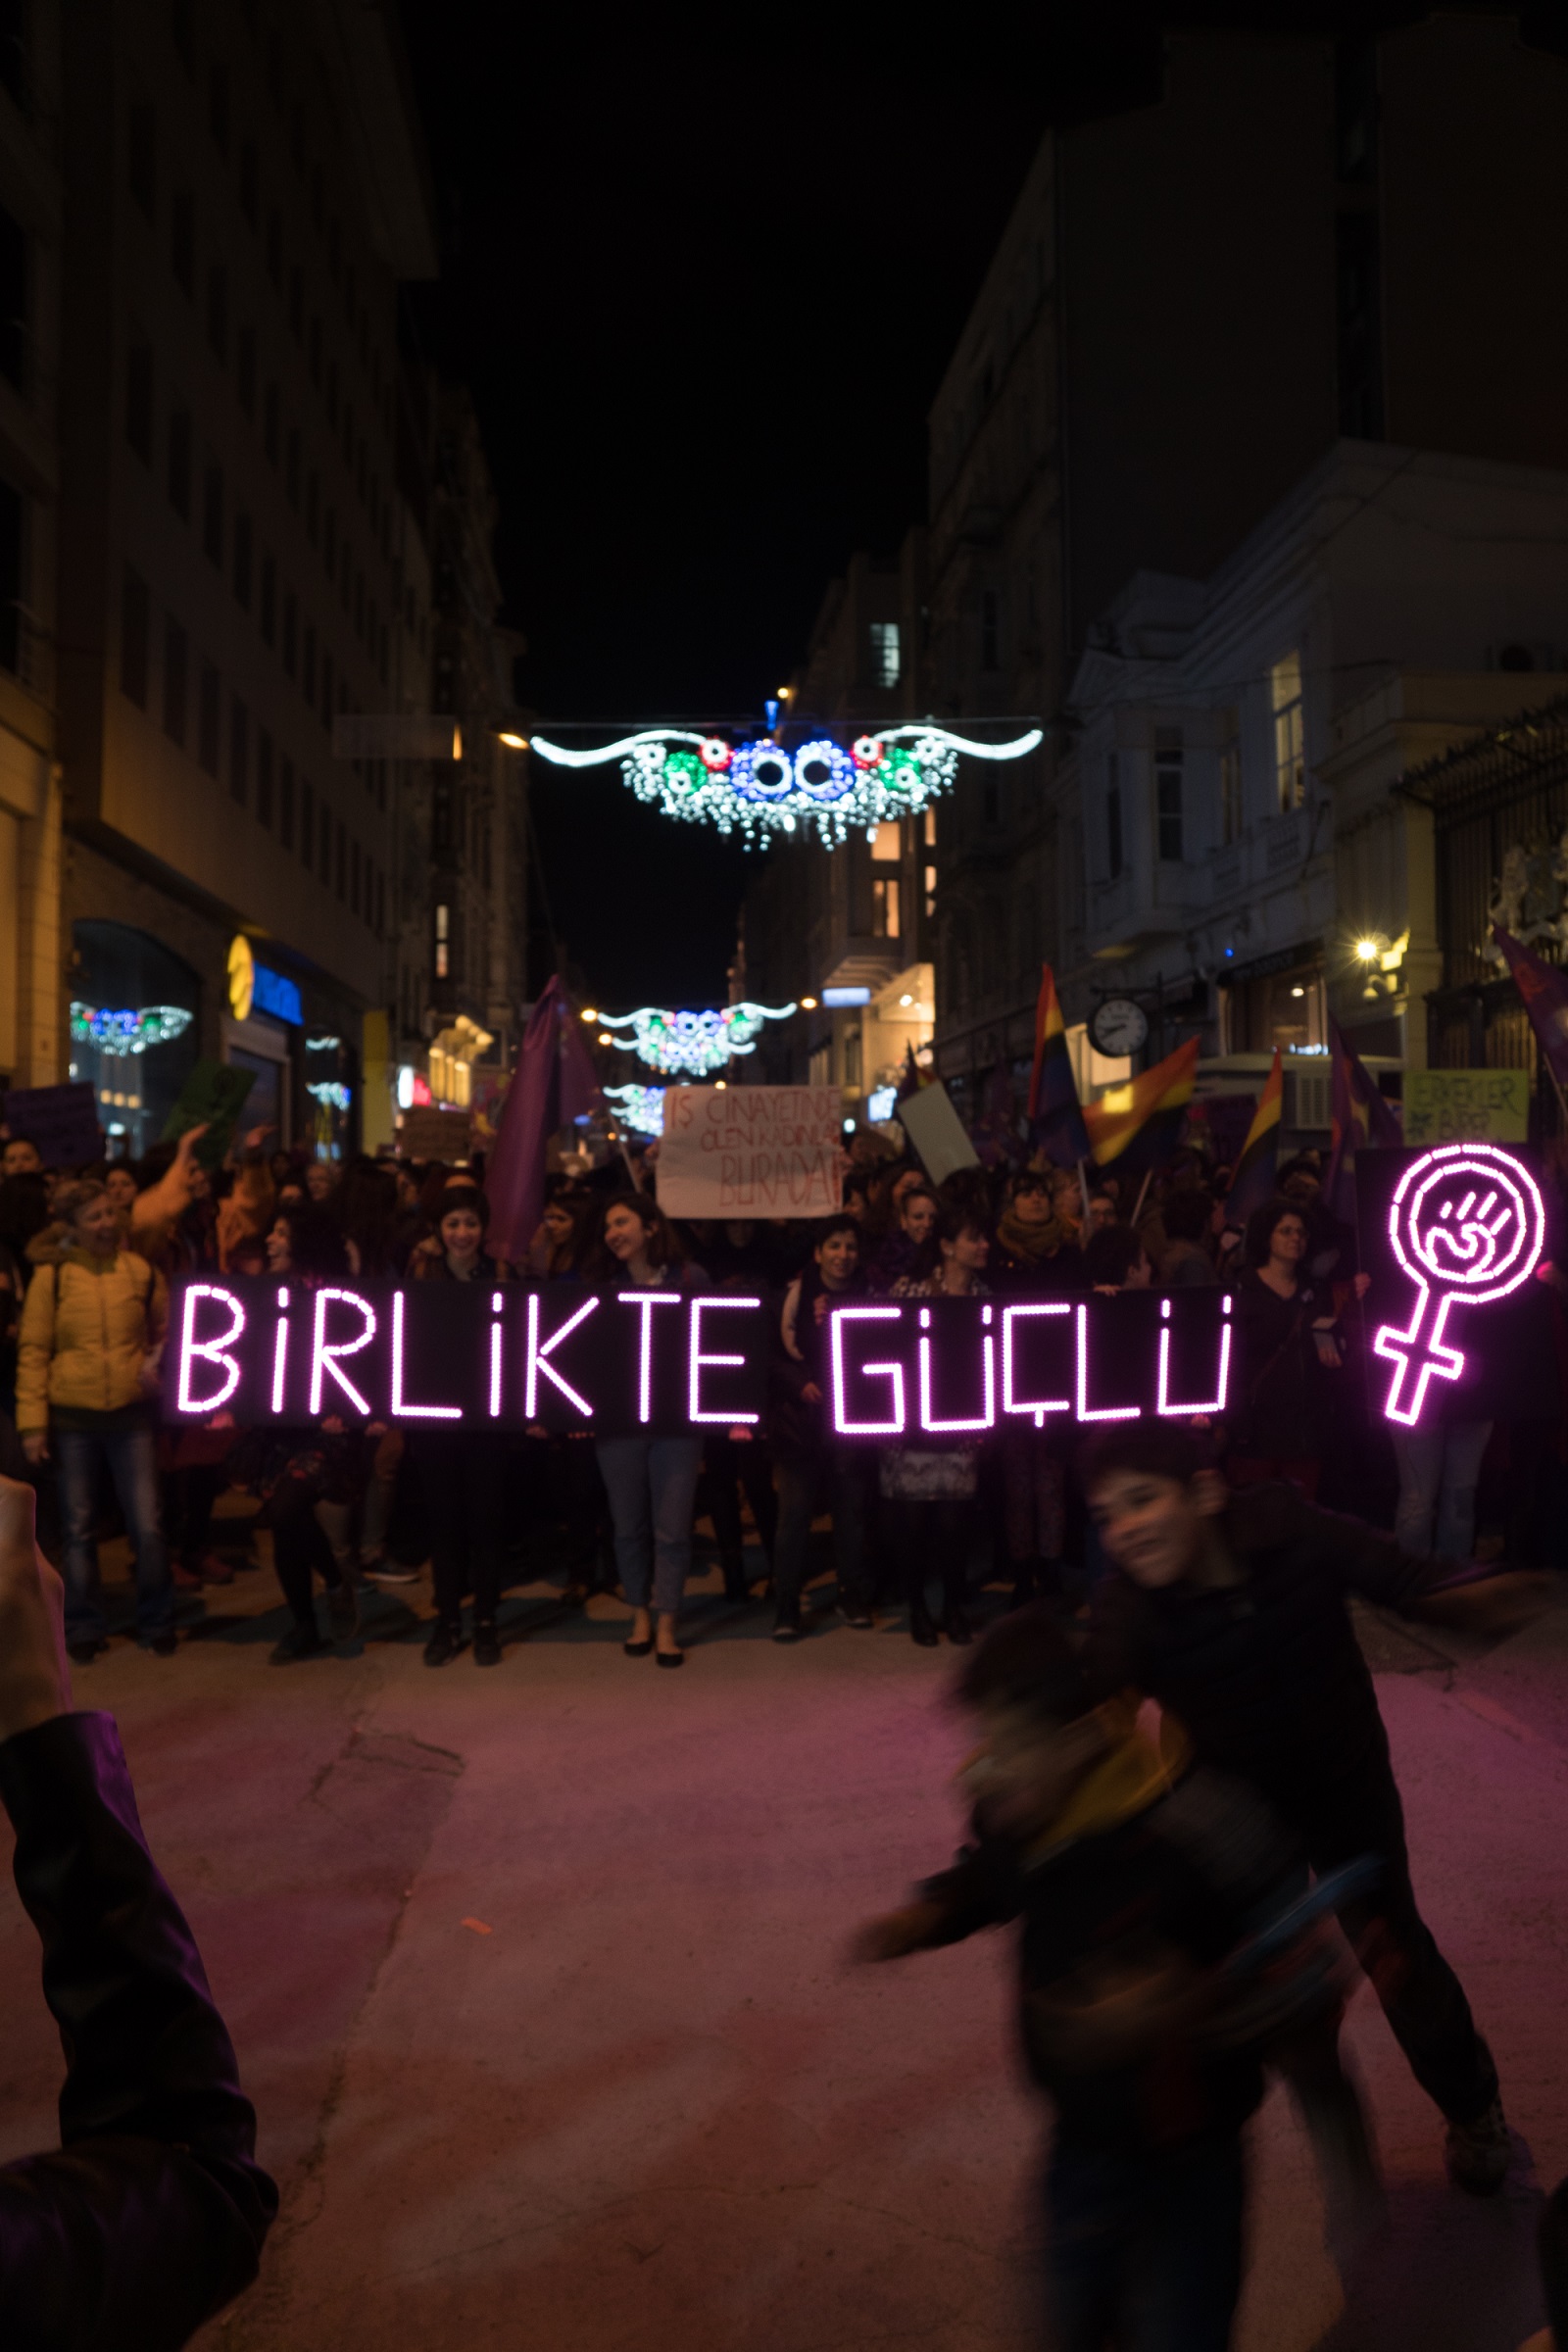 It’s an idiom frequently heard in Turkey —  by mothers speaking of their sons, by bricklayers completing new roads by hand, and by the youth in the cafes and streets who speak of the change they hope to see in their country during their lifetimes. ‘Strong Together’ at the Women’s March in Istanbul.